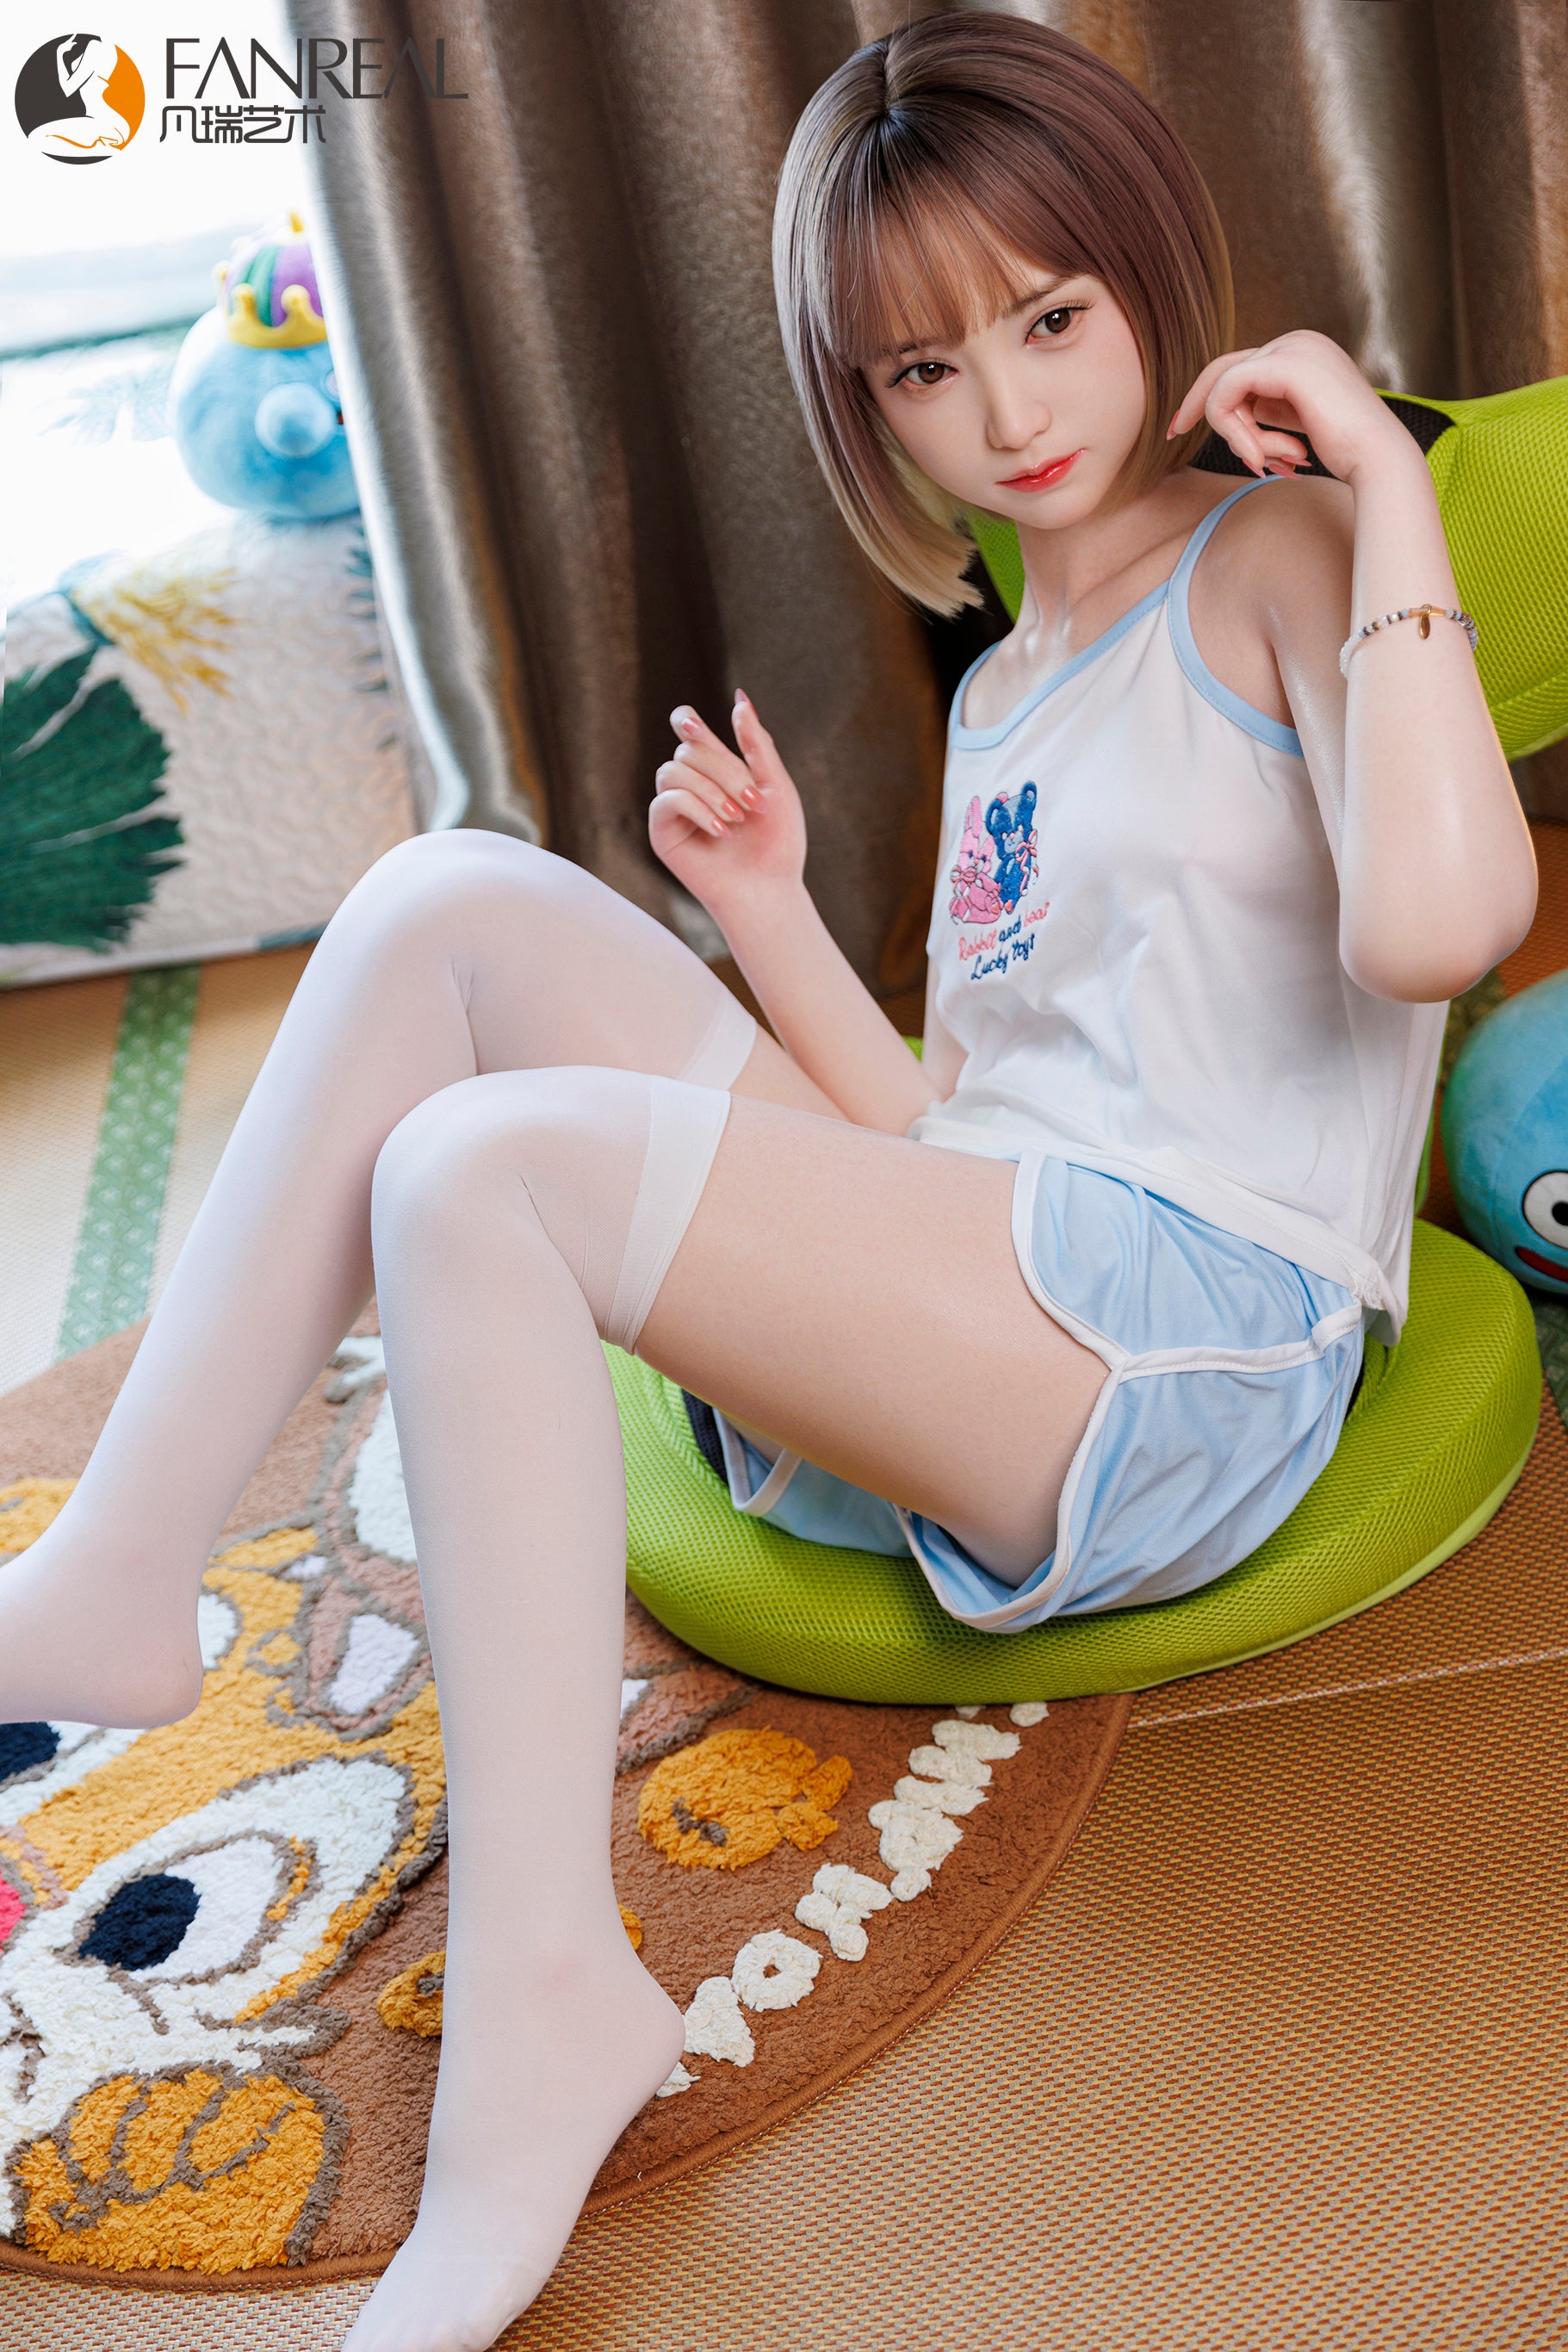 FANREAL DOLL 153 CM B Silicone - Mo | Buy Sex Dolls at DOLLS ACTUALLY